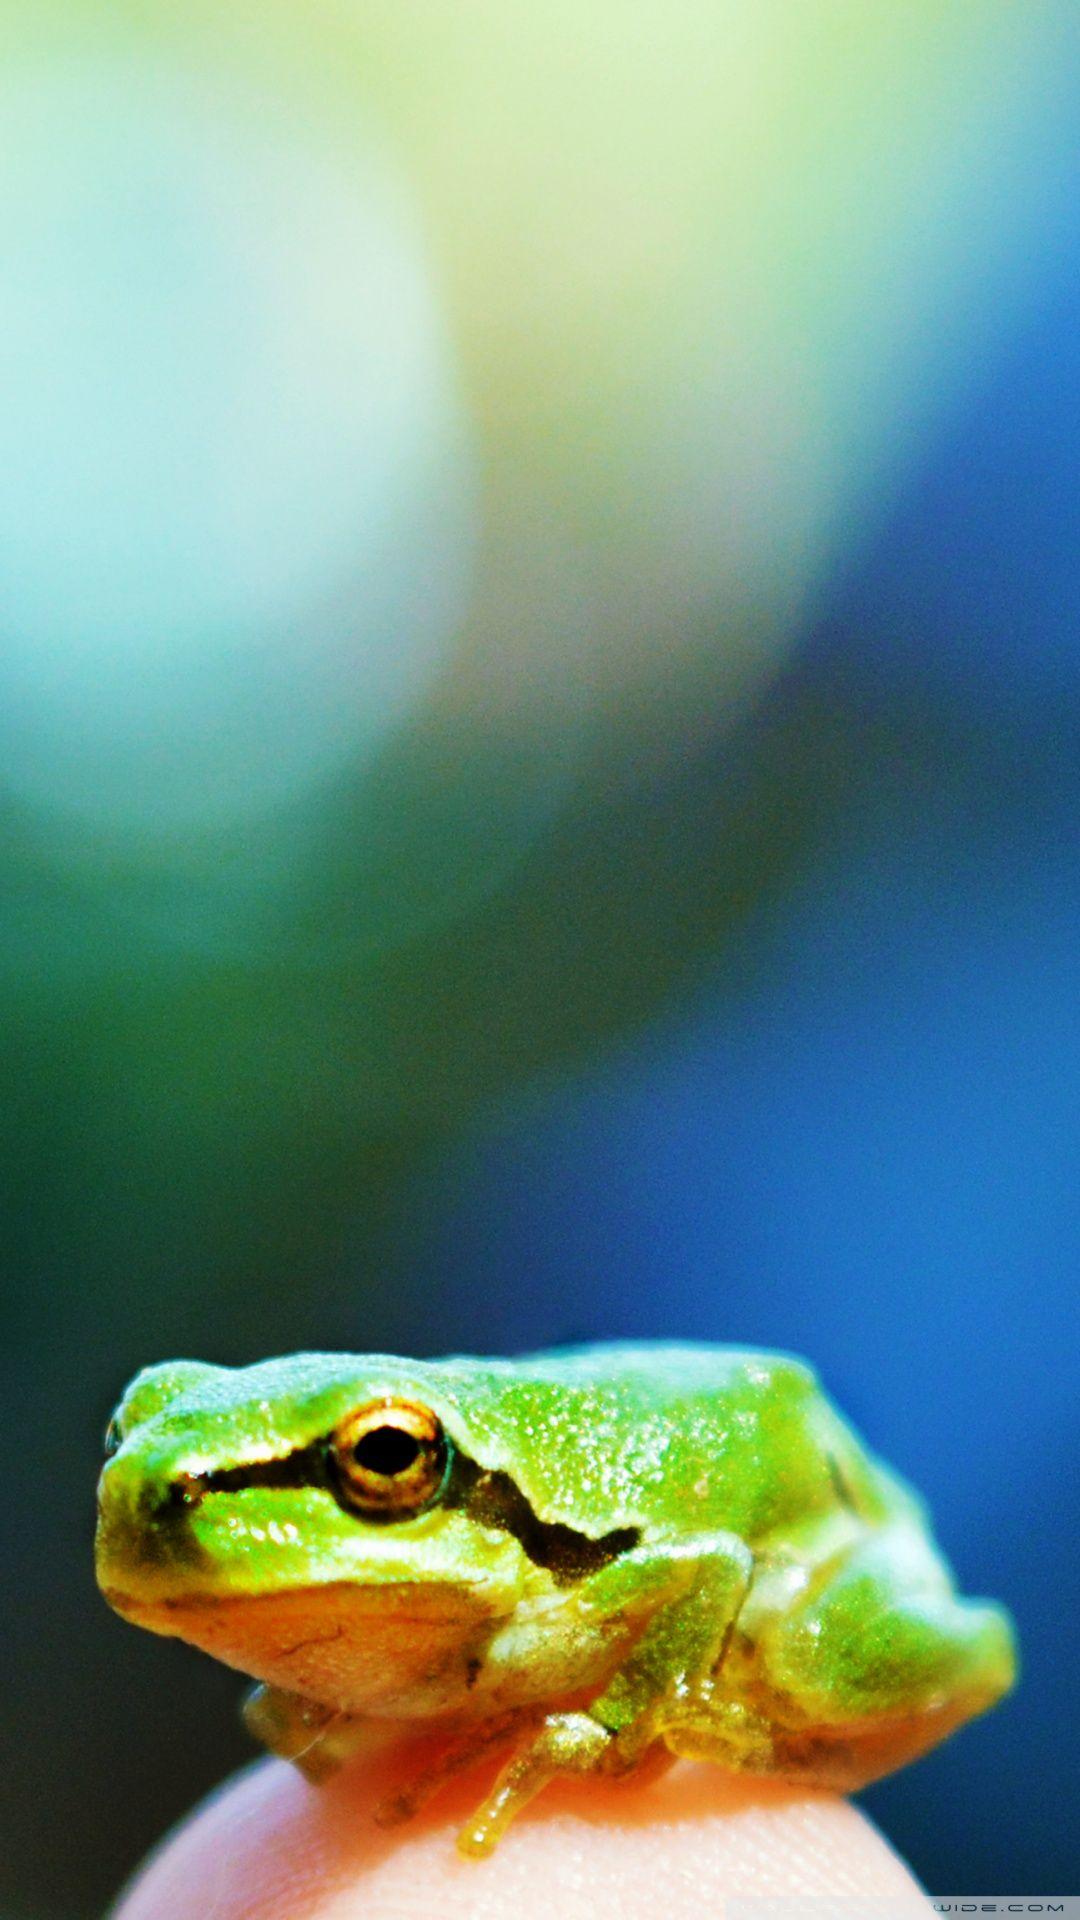 TAP AND GET THE FREE APP Art Creative Nature Frog Green Red Eyes HD  iPhone 5 Wallpaper  Frog wallpaper Wallpaper iphone love Iphone 6 plus  wallpaper